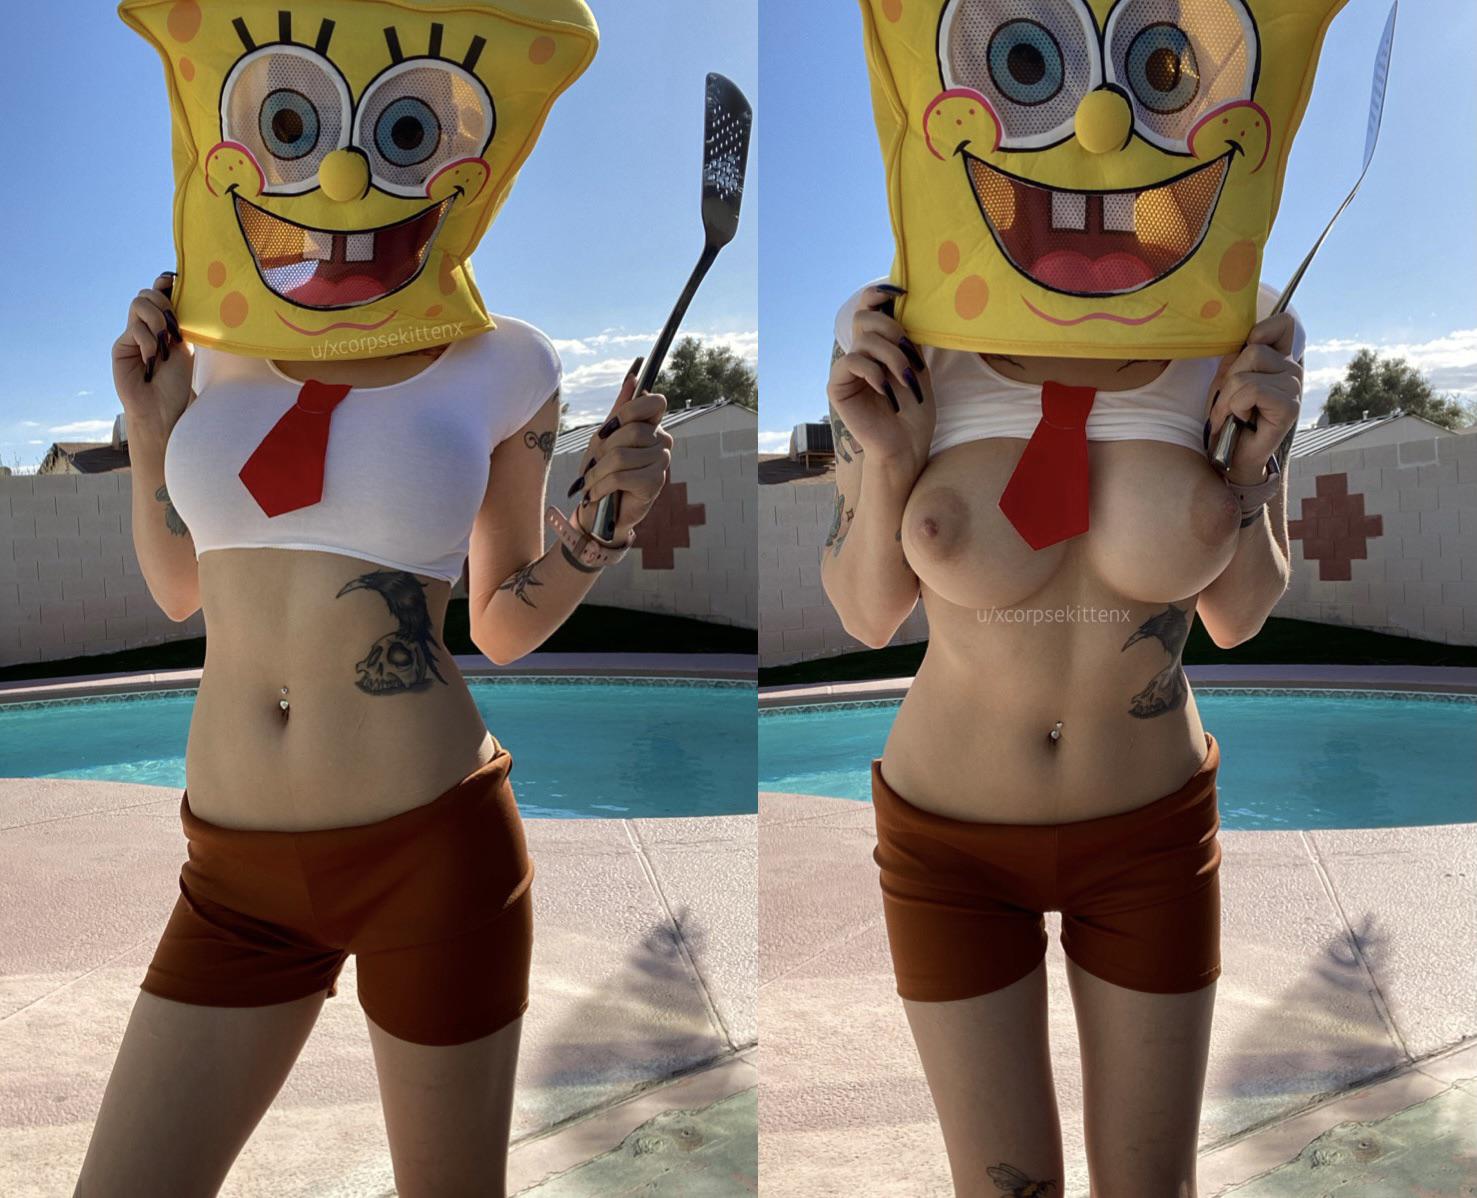 The SpongeBob mask stays on during photo